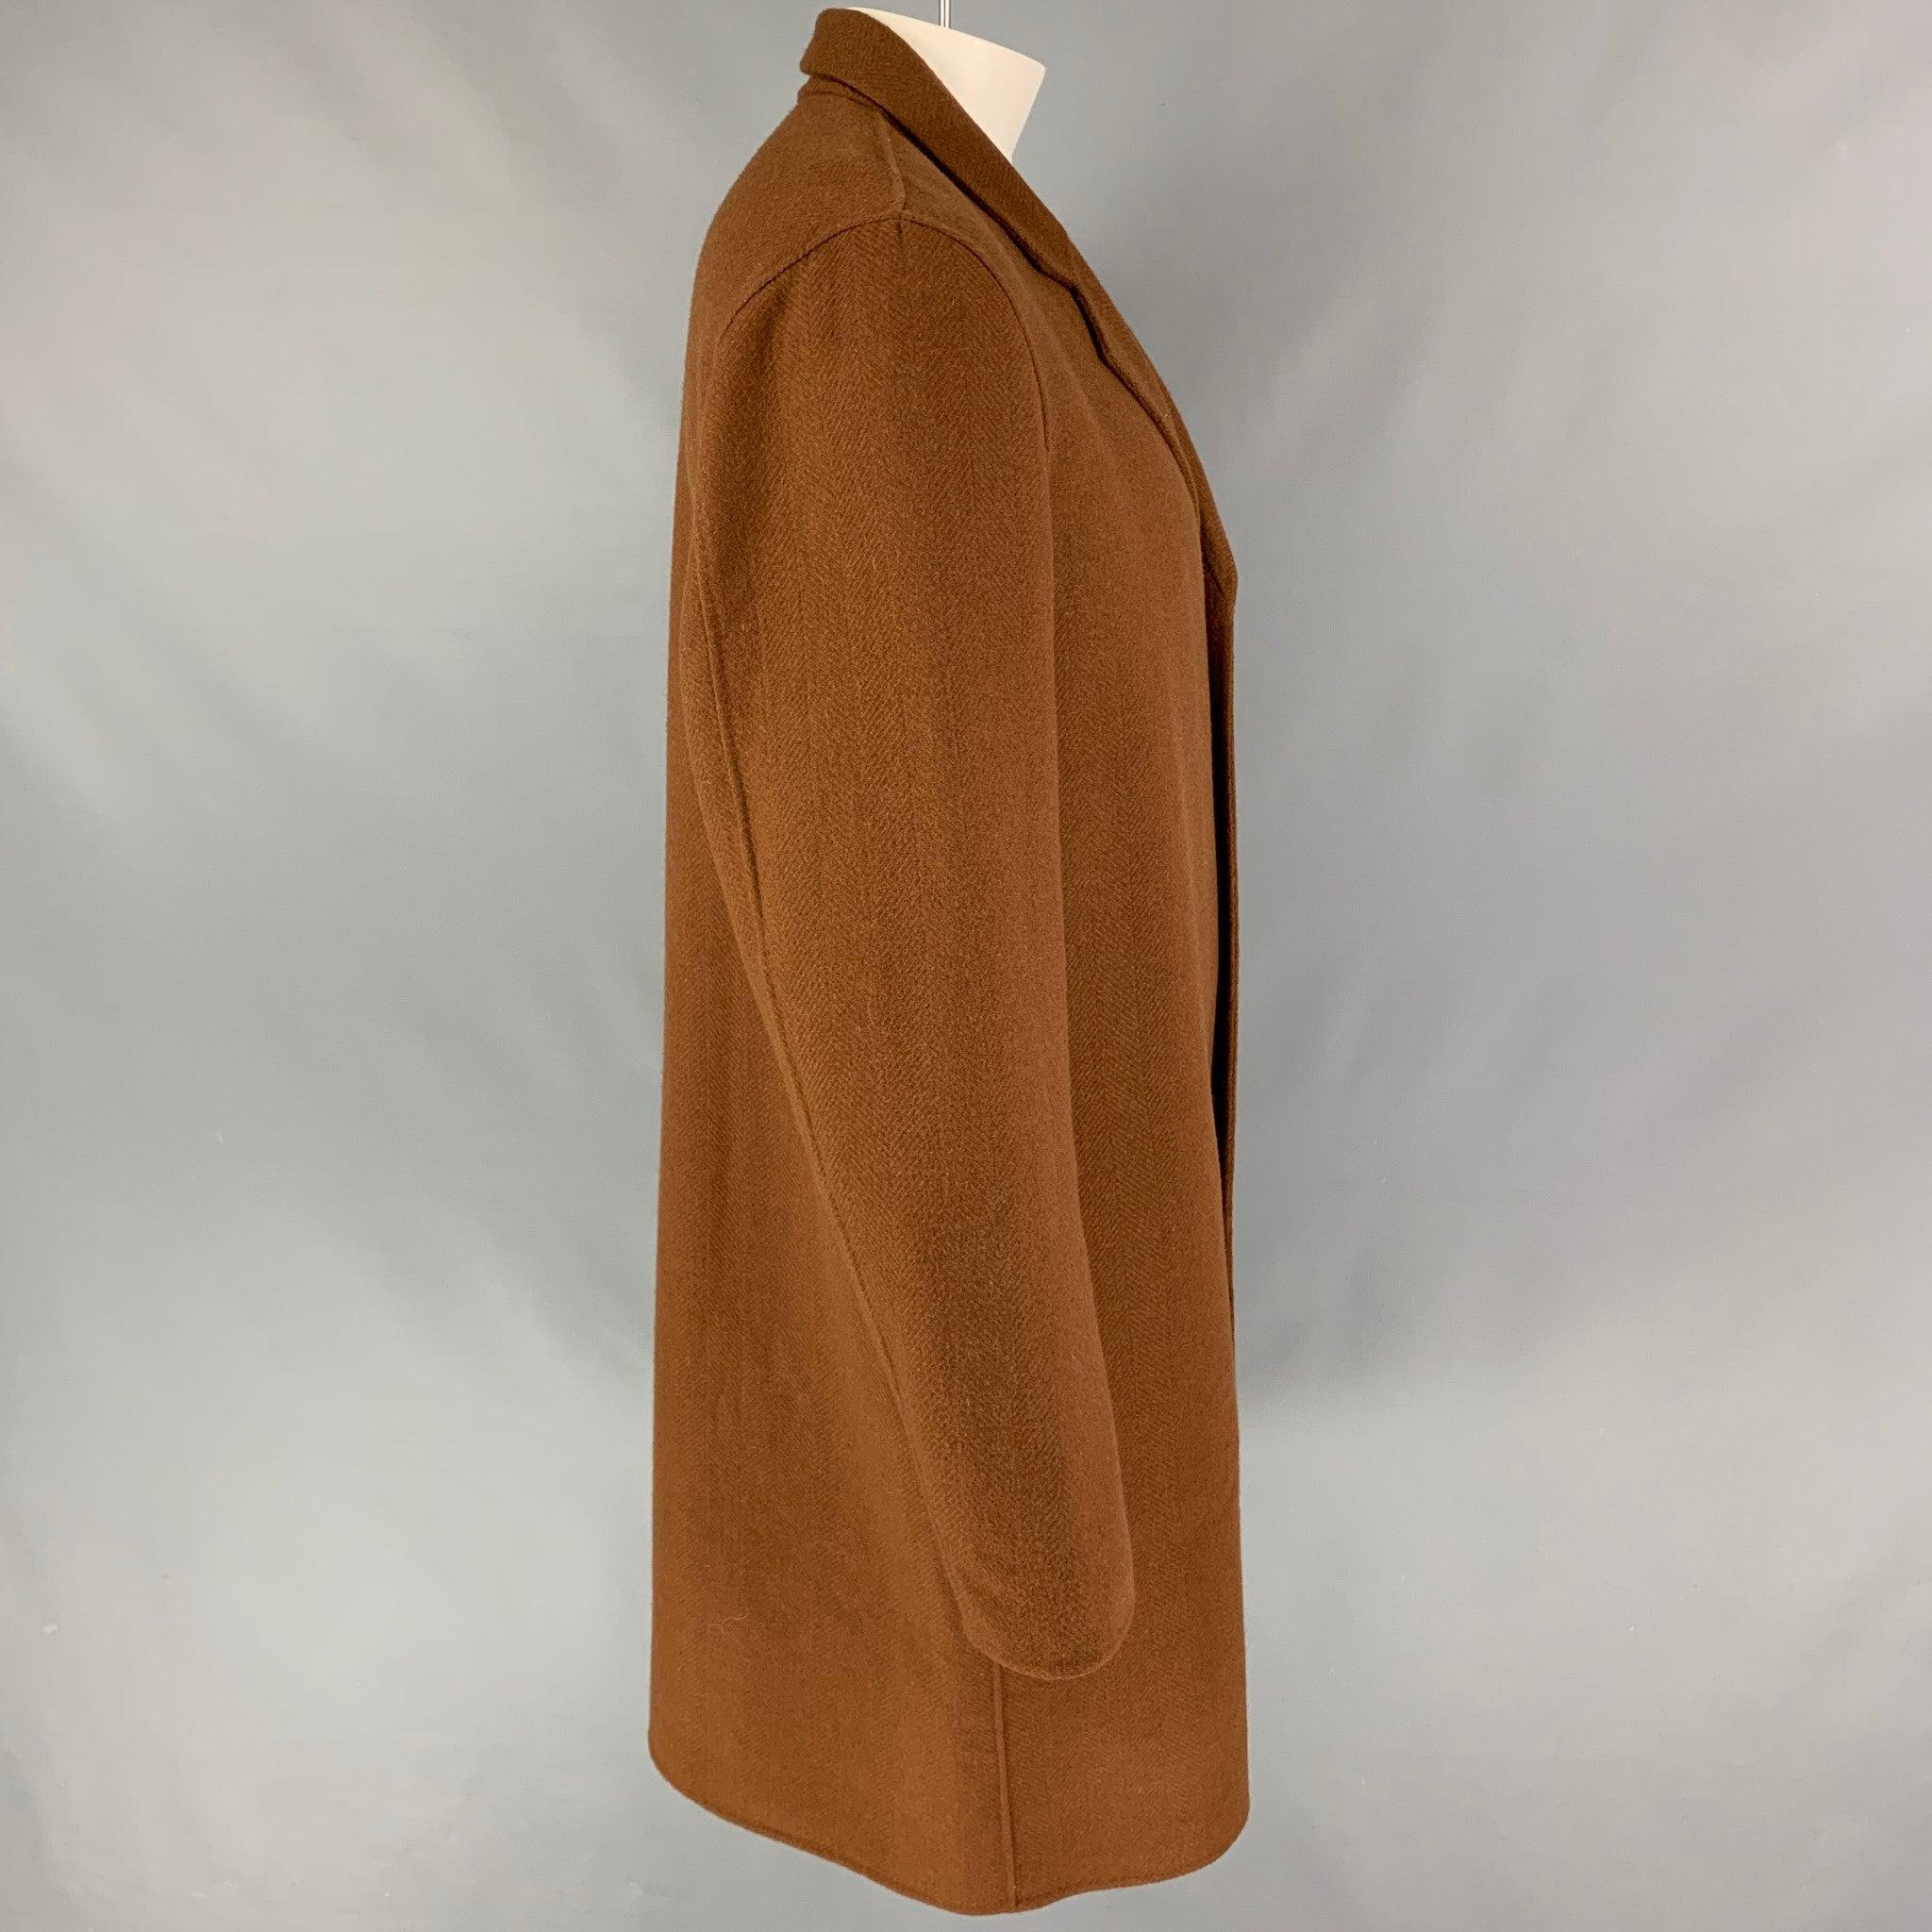 VINCE coat comes in a brown herringbone wool / cashmere featuring a notch lapel, slit pockets, and a buttoned closure.
New With Tags.
 

Marked:  XXL 

Measurements: 
 
Shoulder: 20.5 inches Chest: 52 inches Sleeve: 27 inches Length: 42 inches 

 
